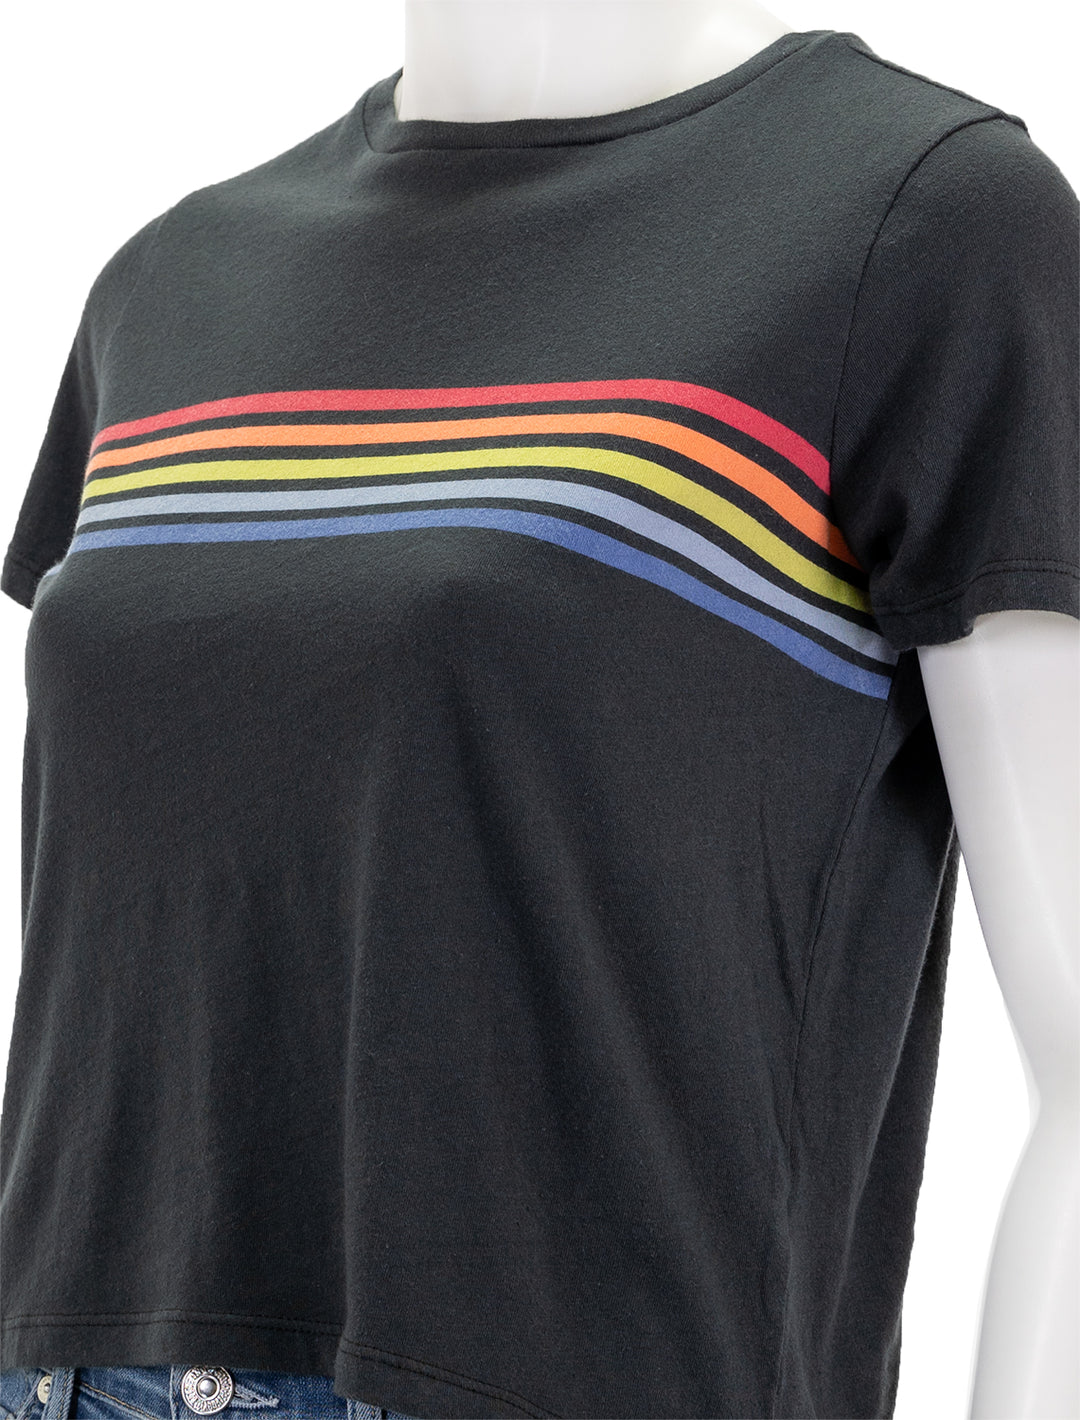 Close-up view of Marine Layer's Crop Graphic Tee in Washed Black.